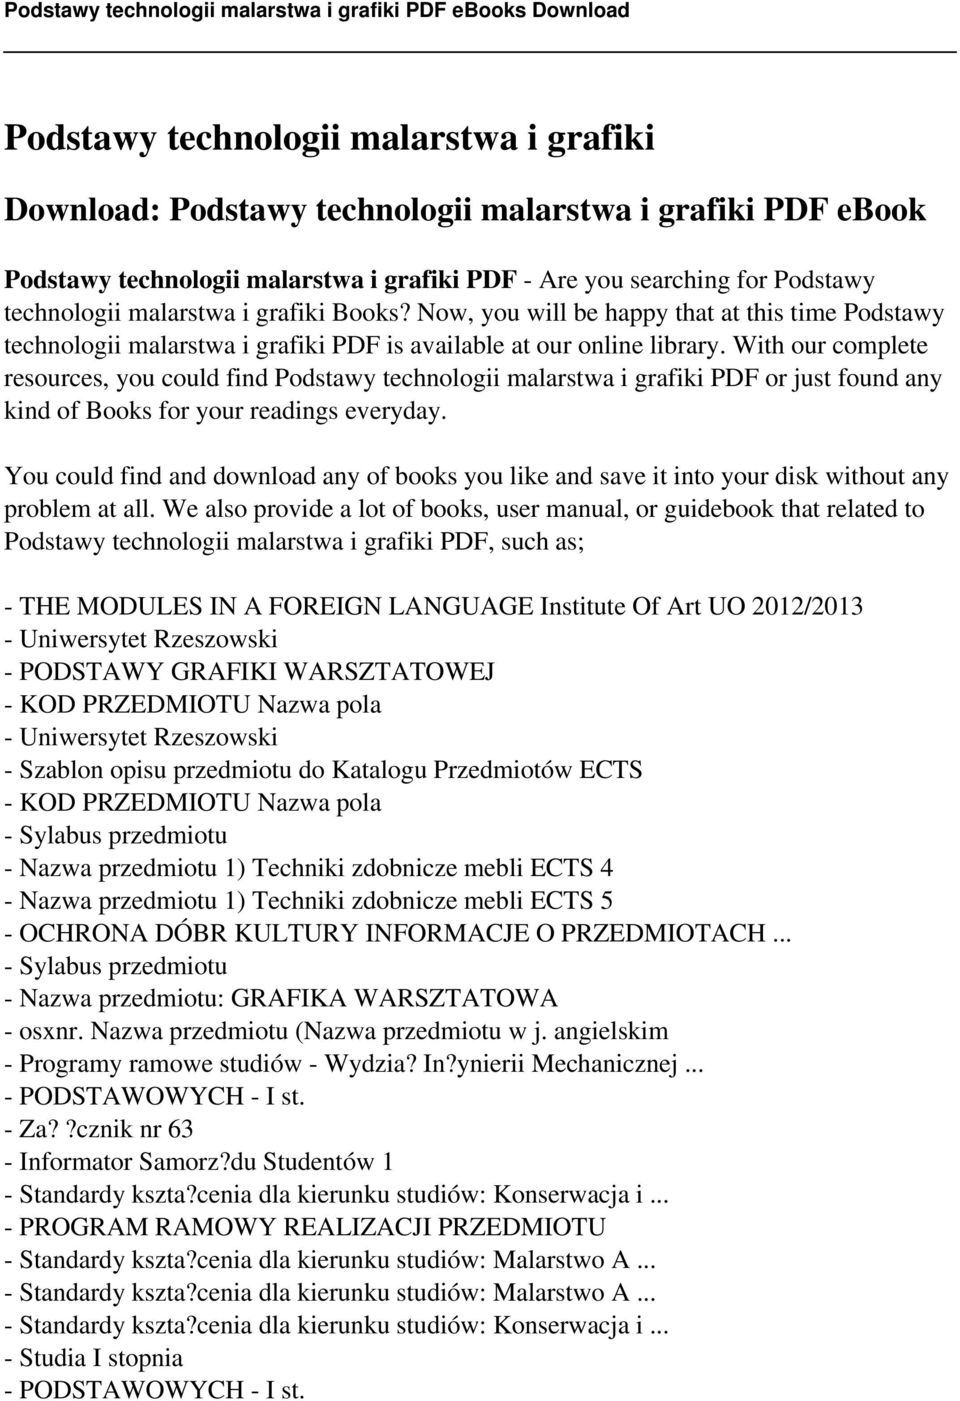 With our complete resources, you could find Podstawy technologii malarstwa i grafiki PDF or just found any kind of Books for your readings everyday.